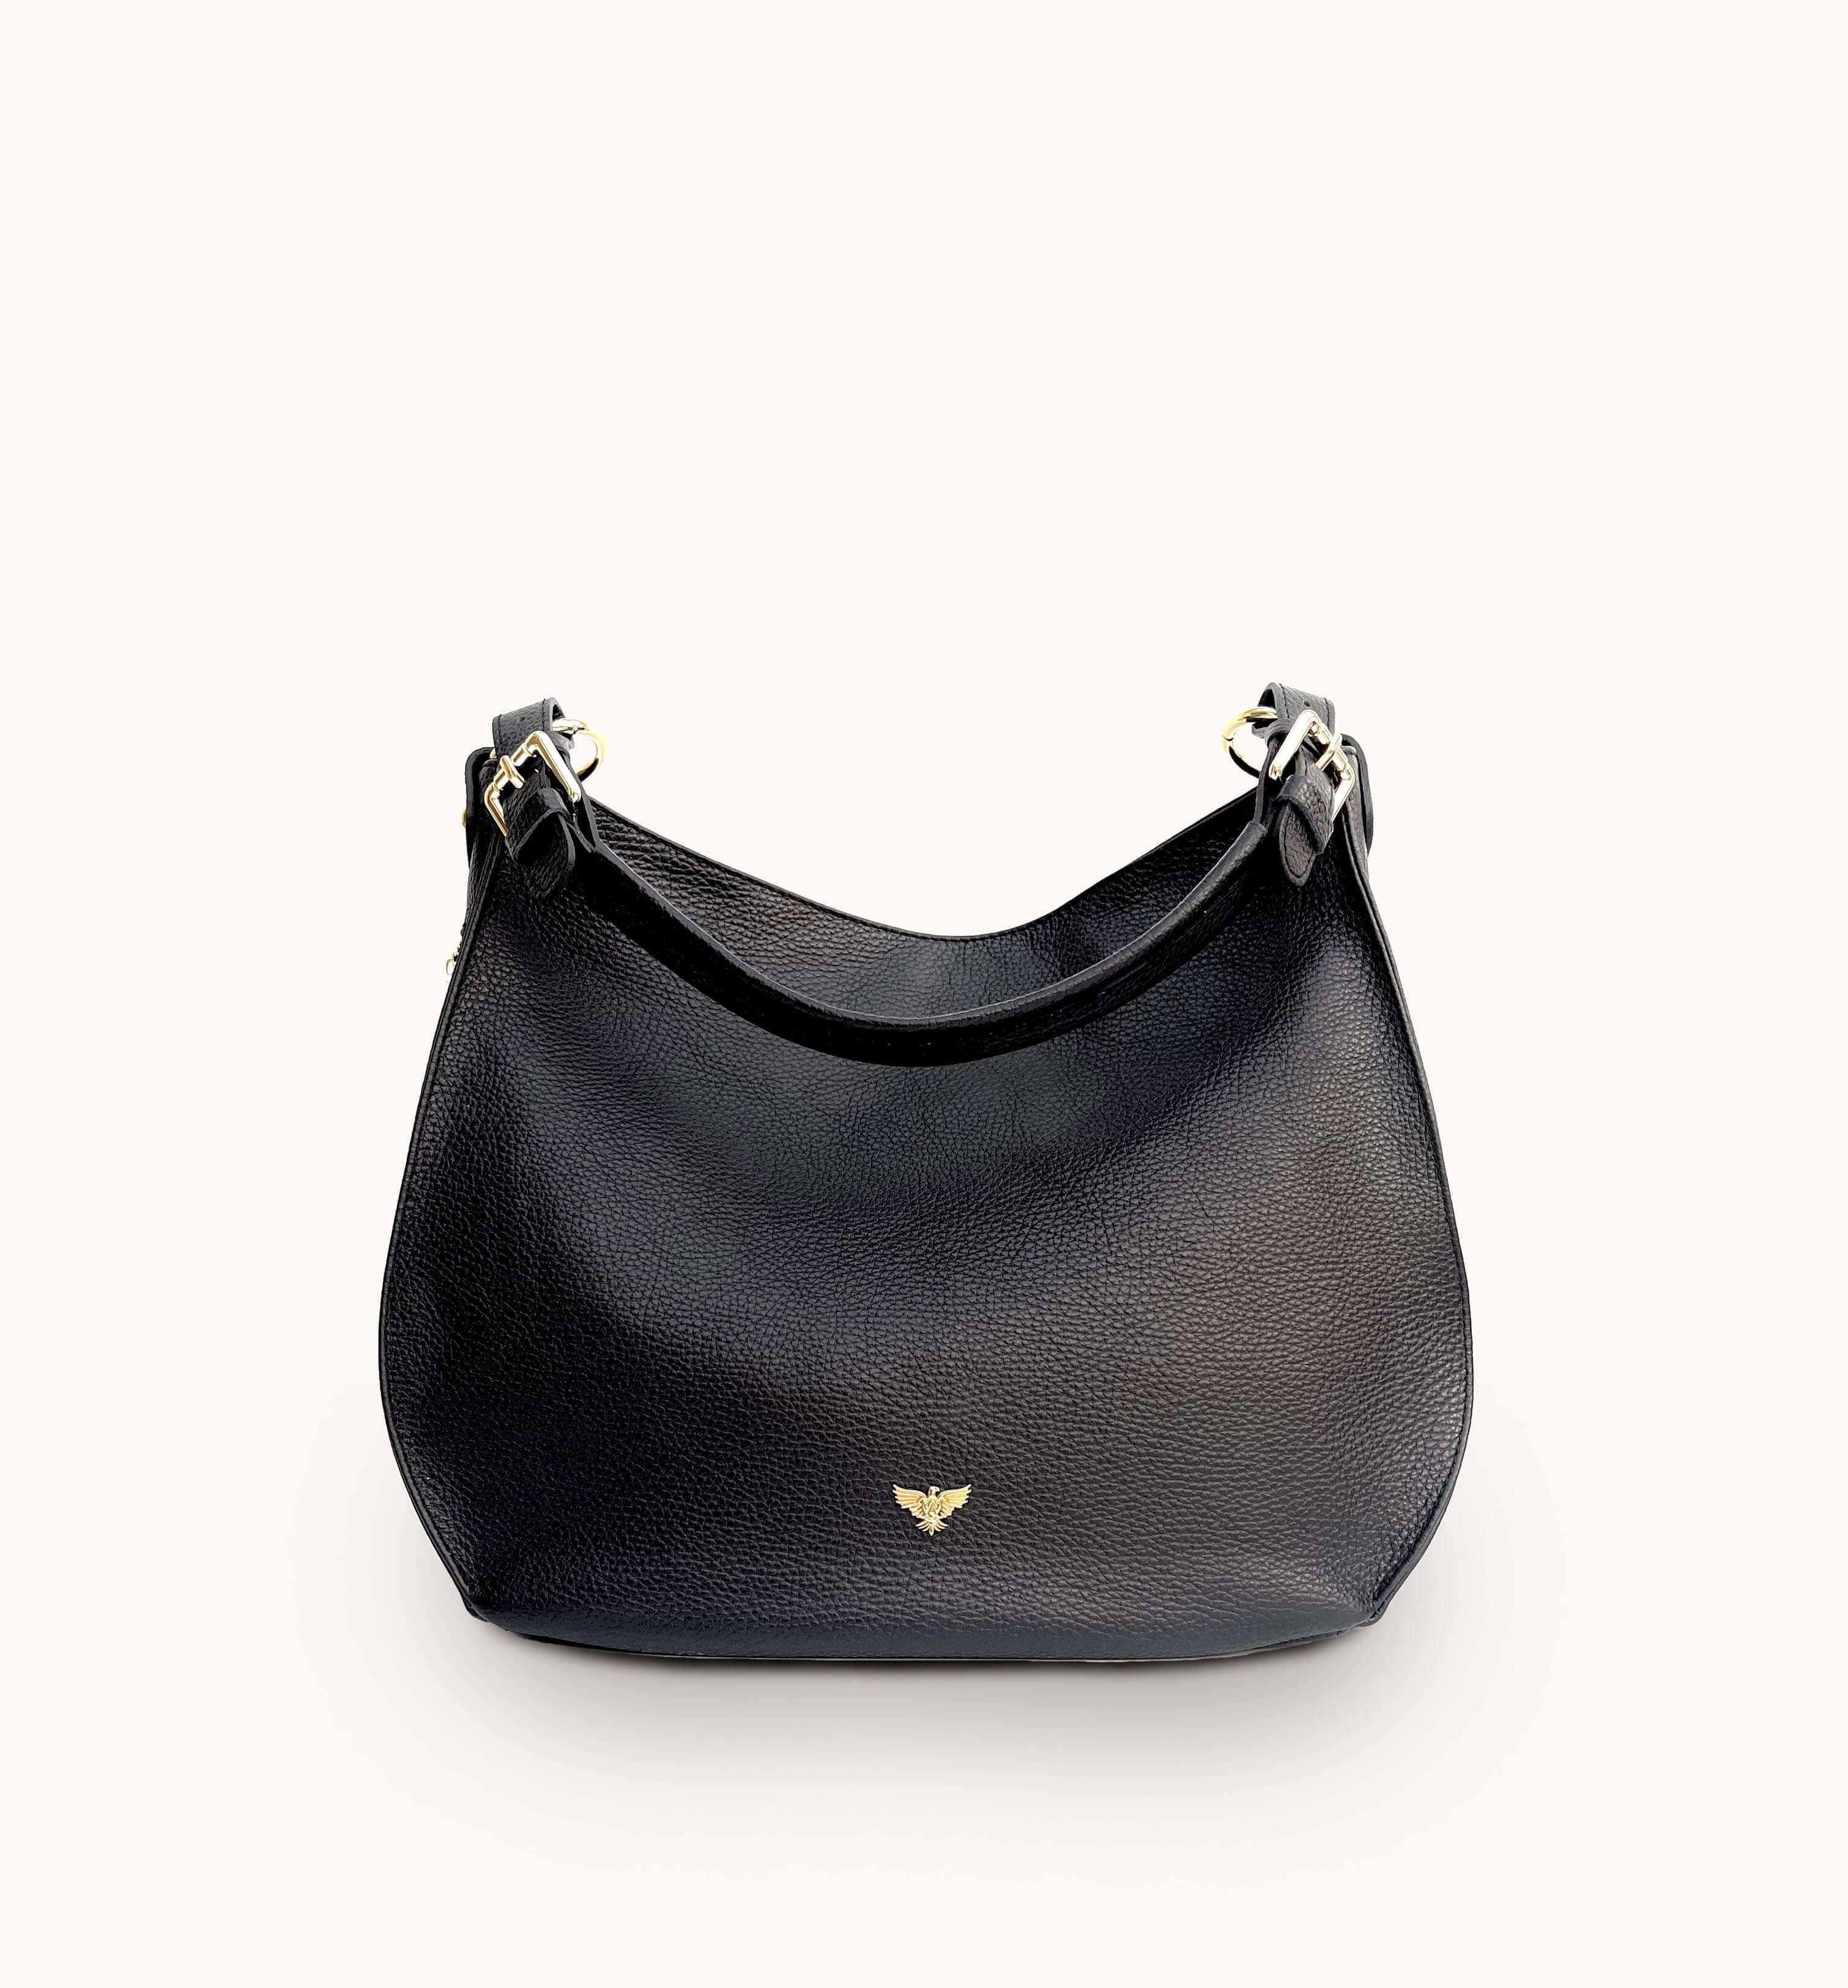 The Harriet Black Leather Bag With Grey Leopard Strap